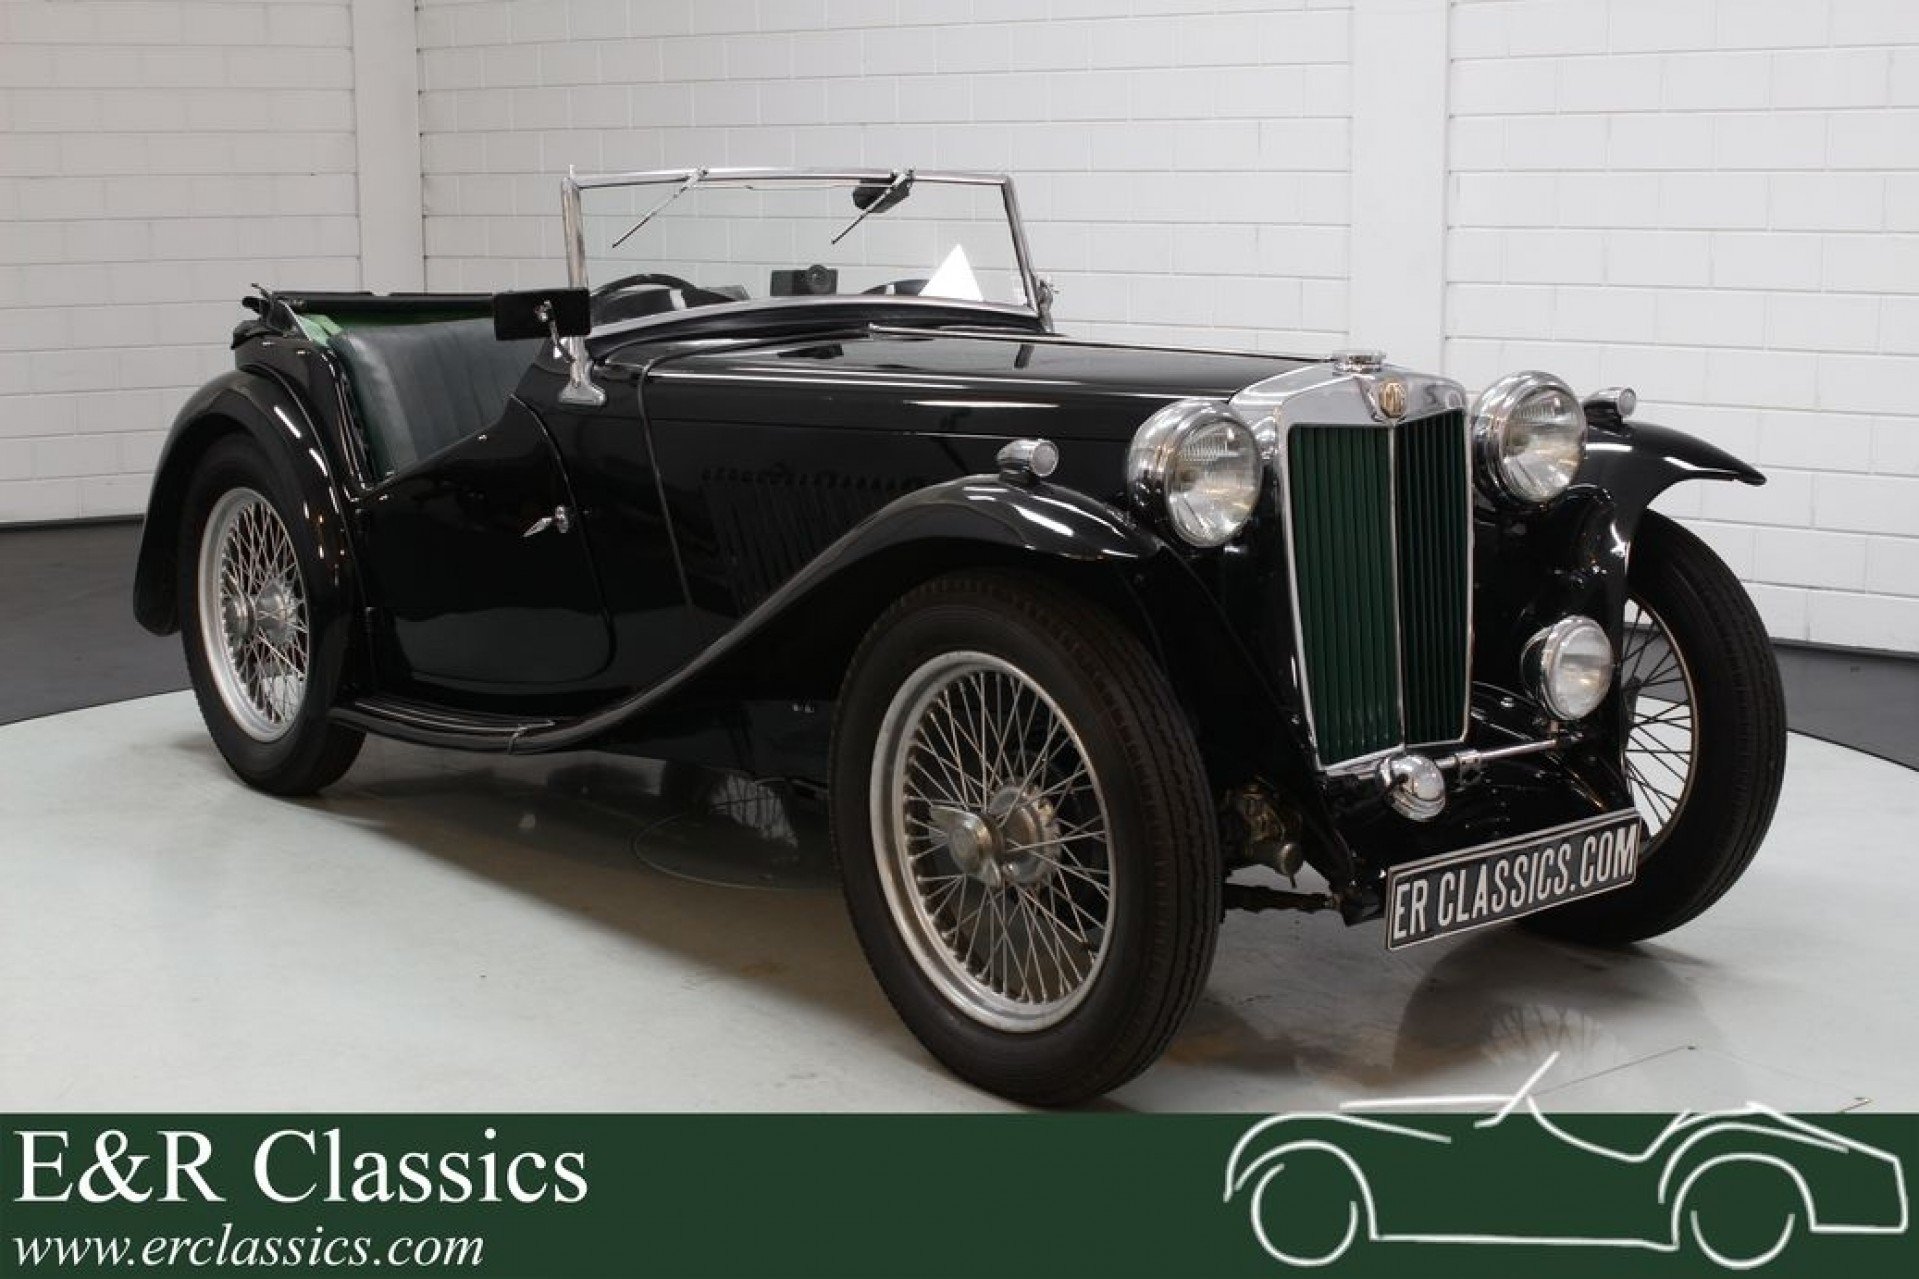 Groot kaping Pessimist MG TC for sale at ERclassics